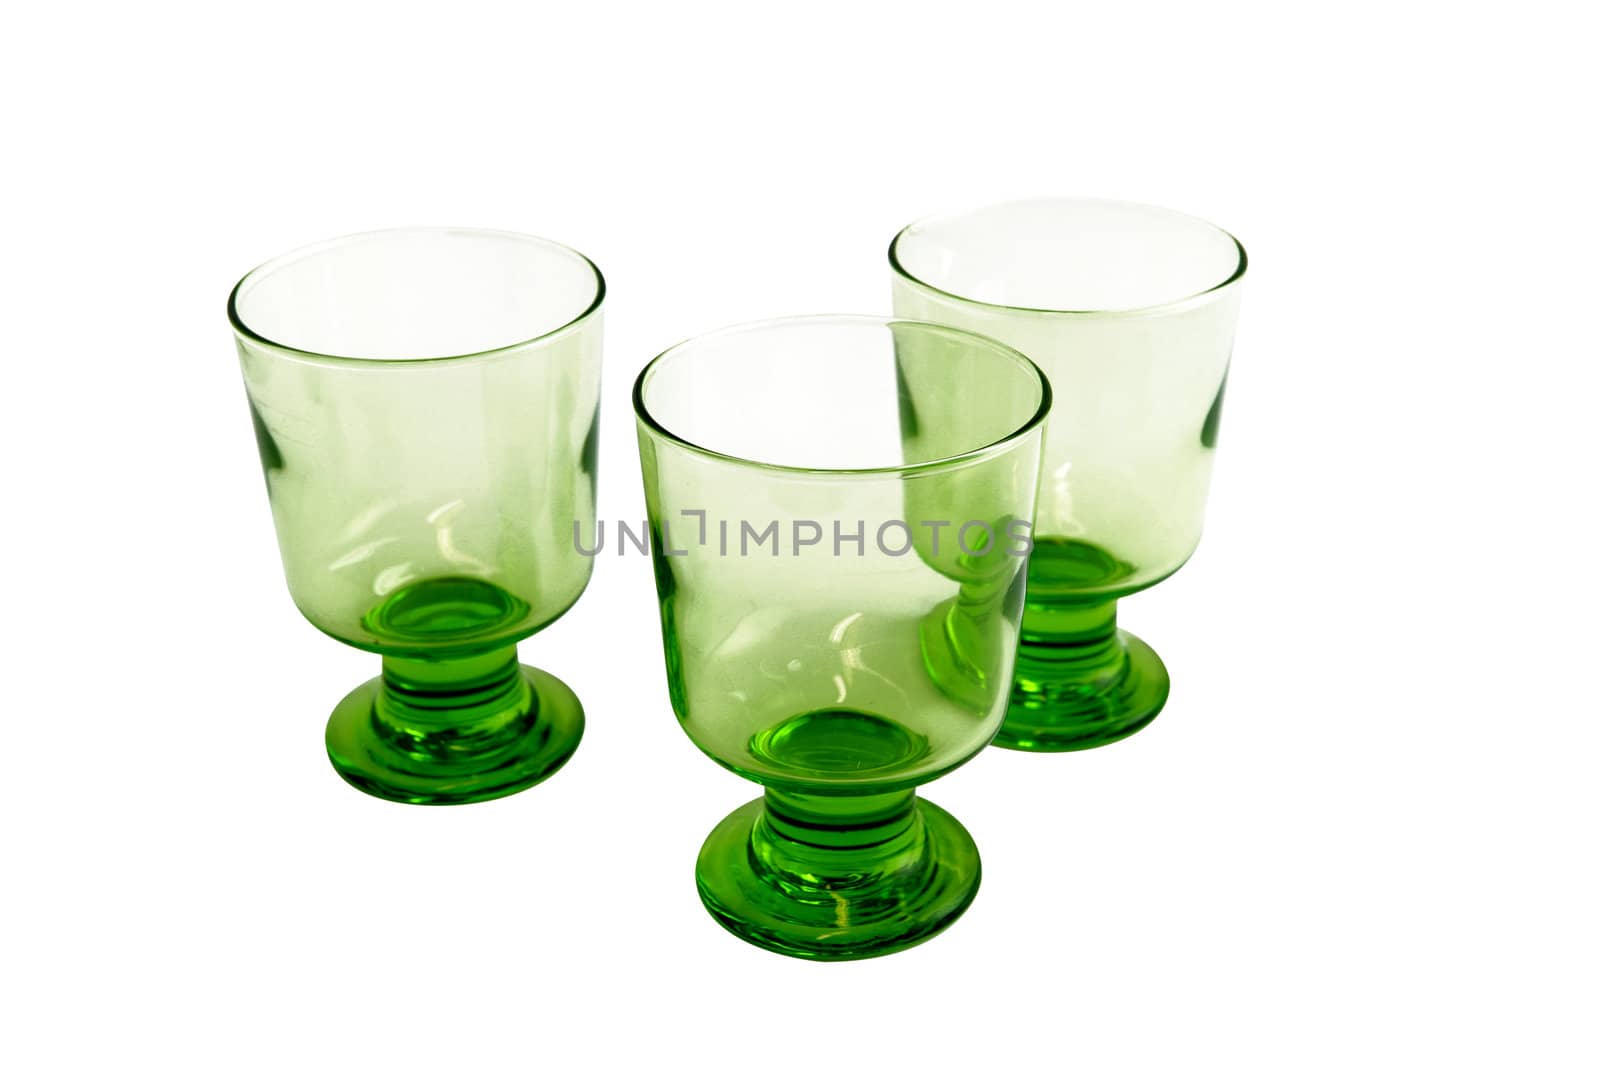 Three green glasses by phovoir